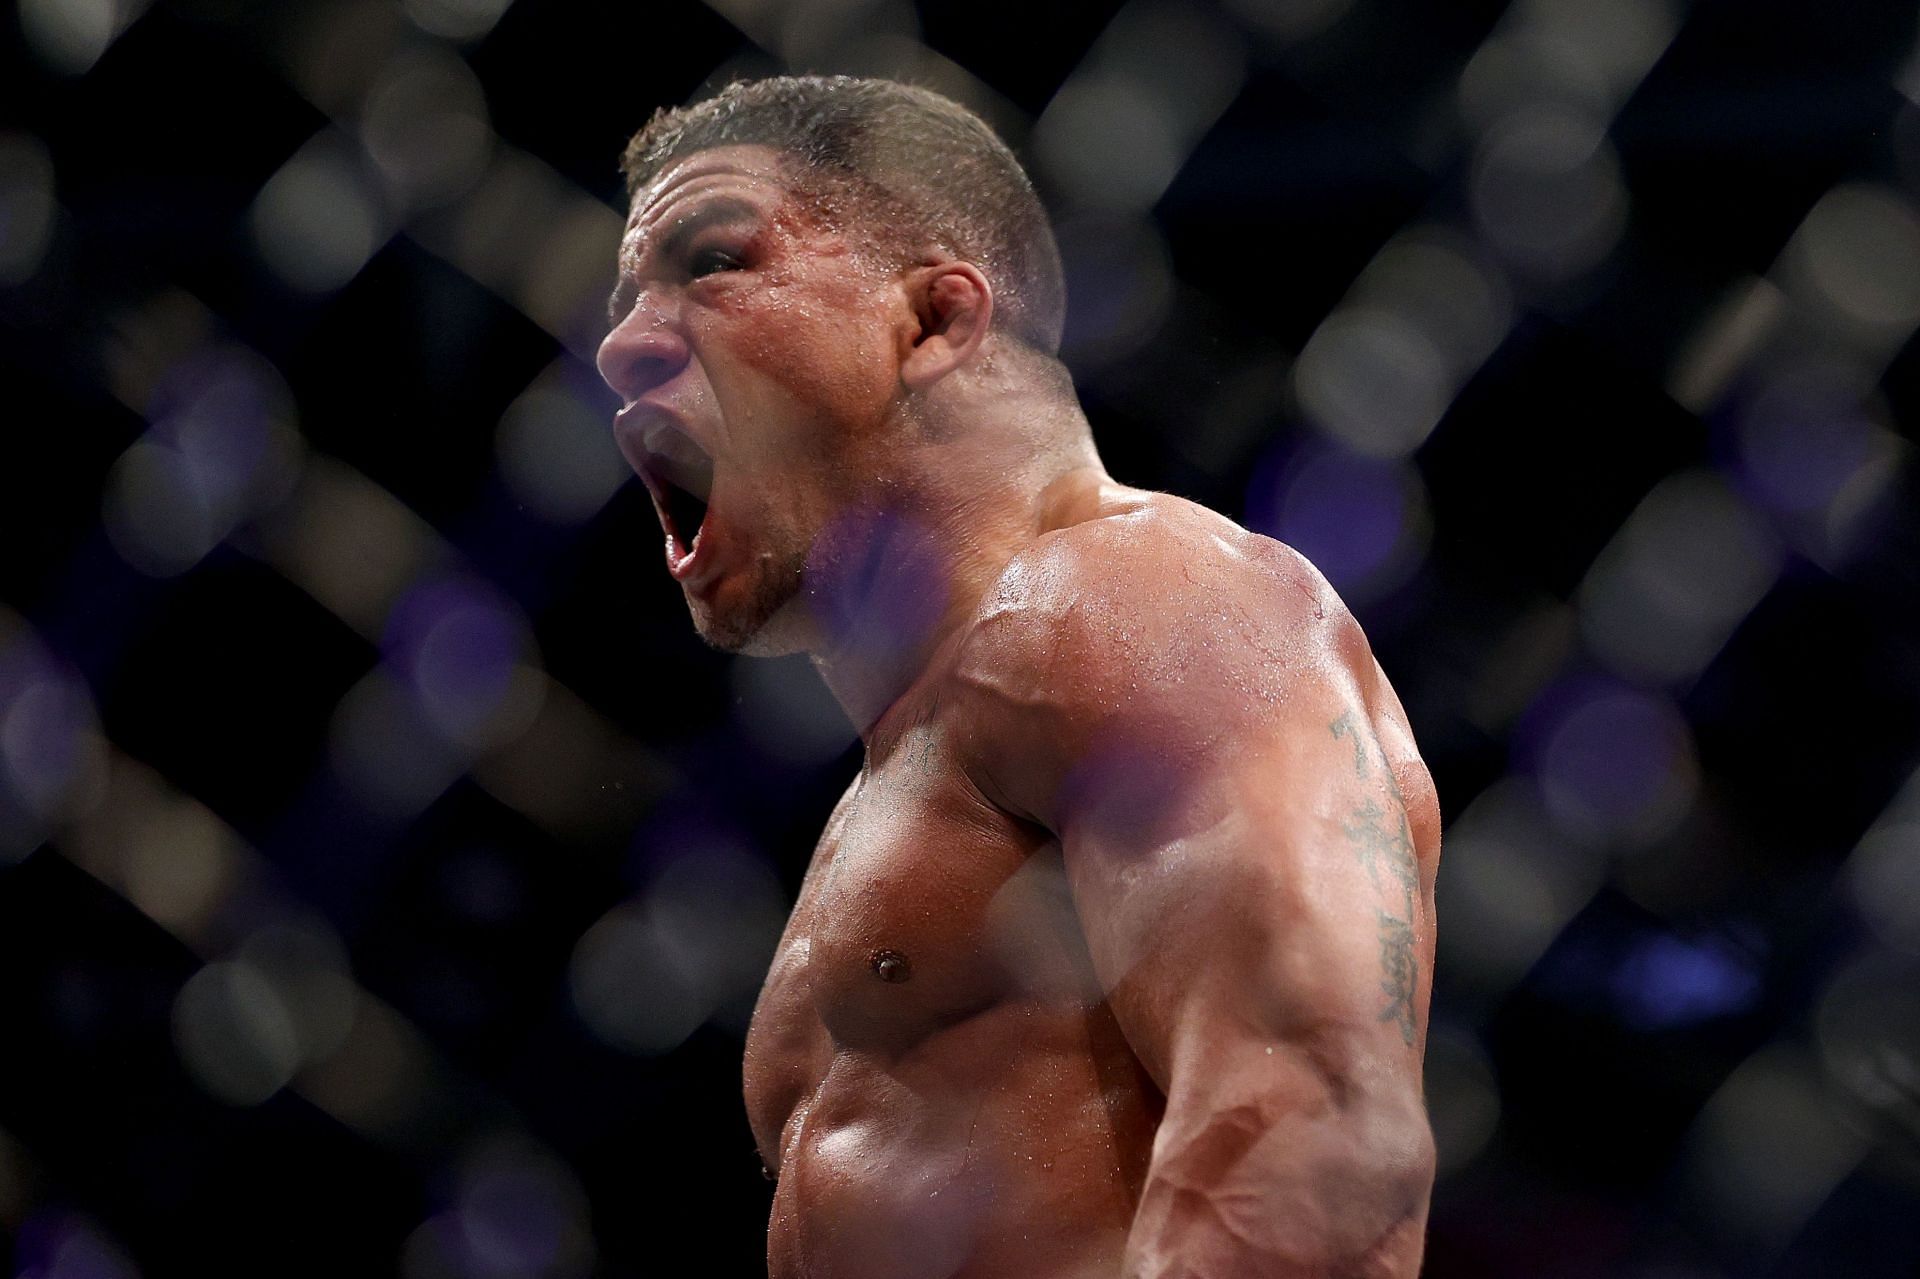 Gilbert Burns will be hoping to get back to winning ways when he faces Neil Magny